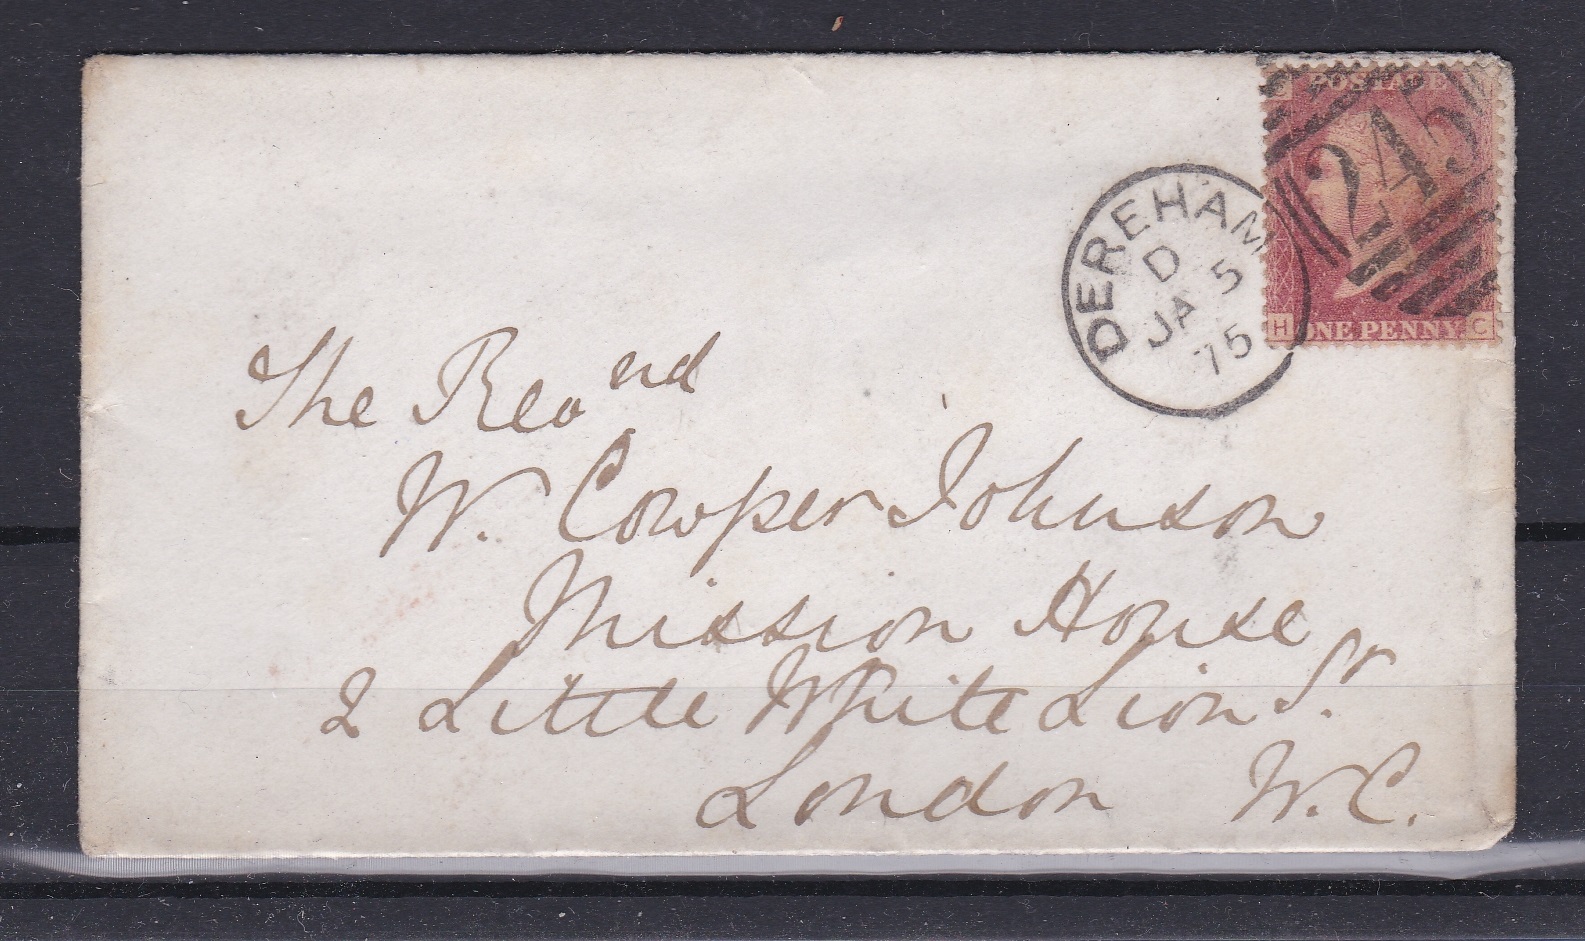 Great Britain 1875-Envelope posted to London cancelled 5.1.1875 Dereham with cds and 245 numeral